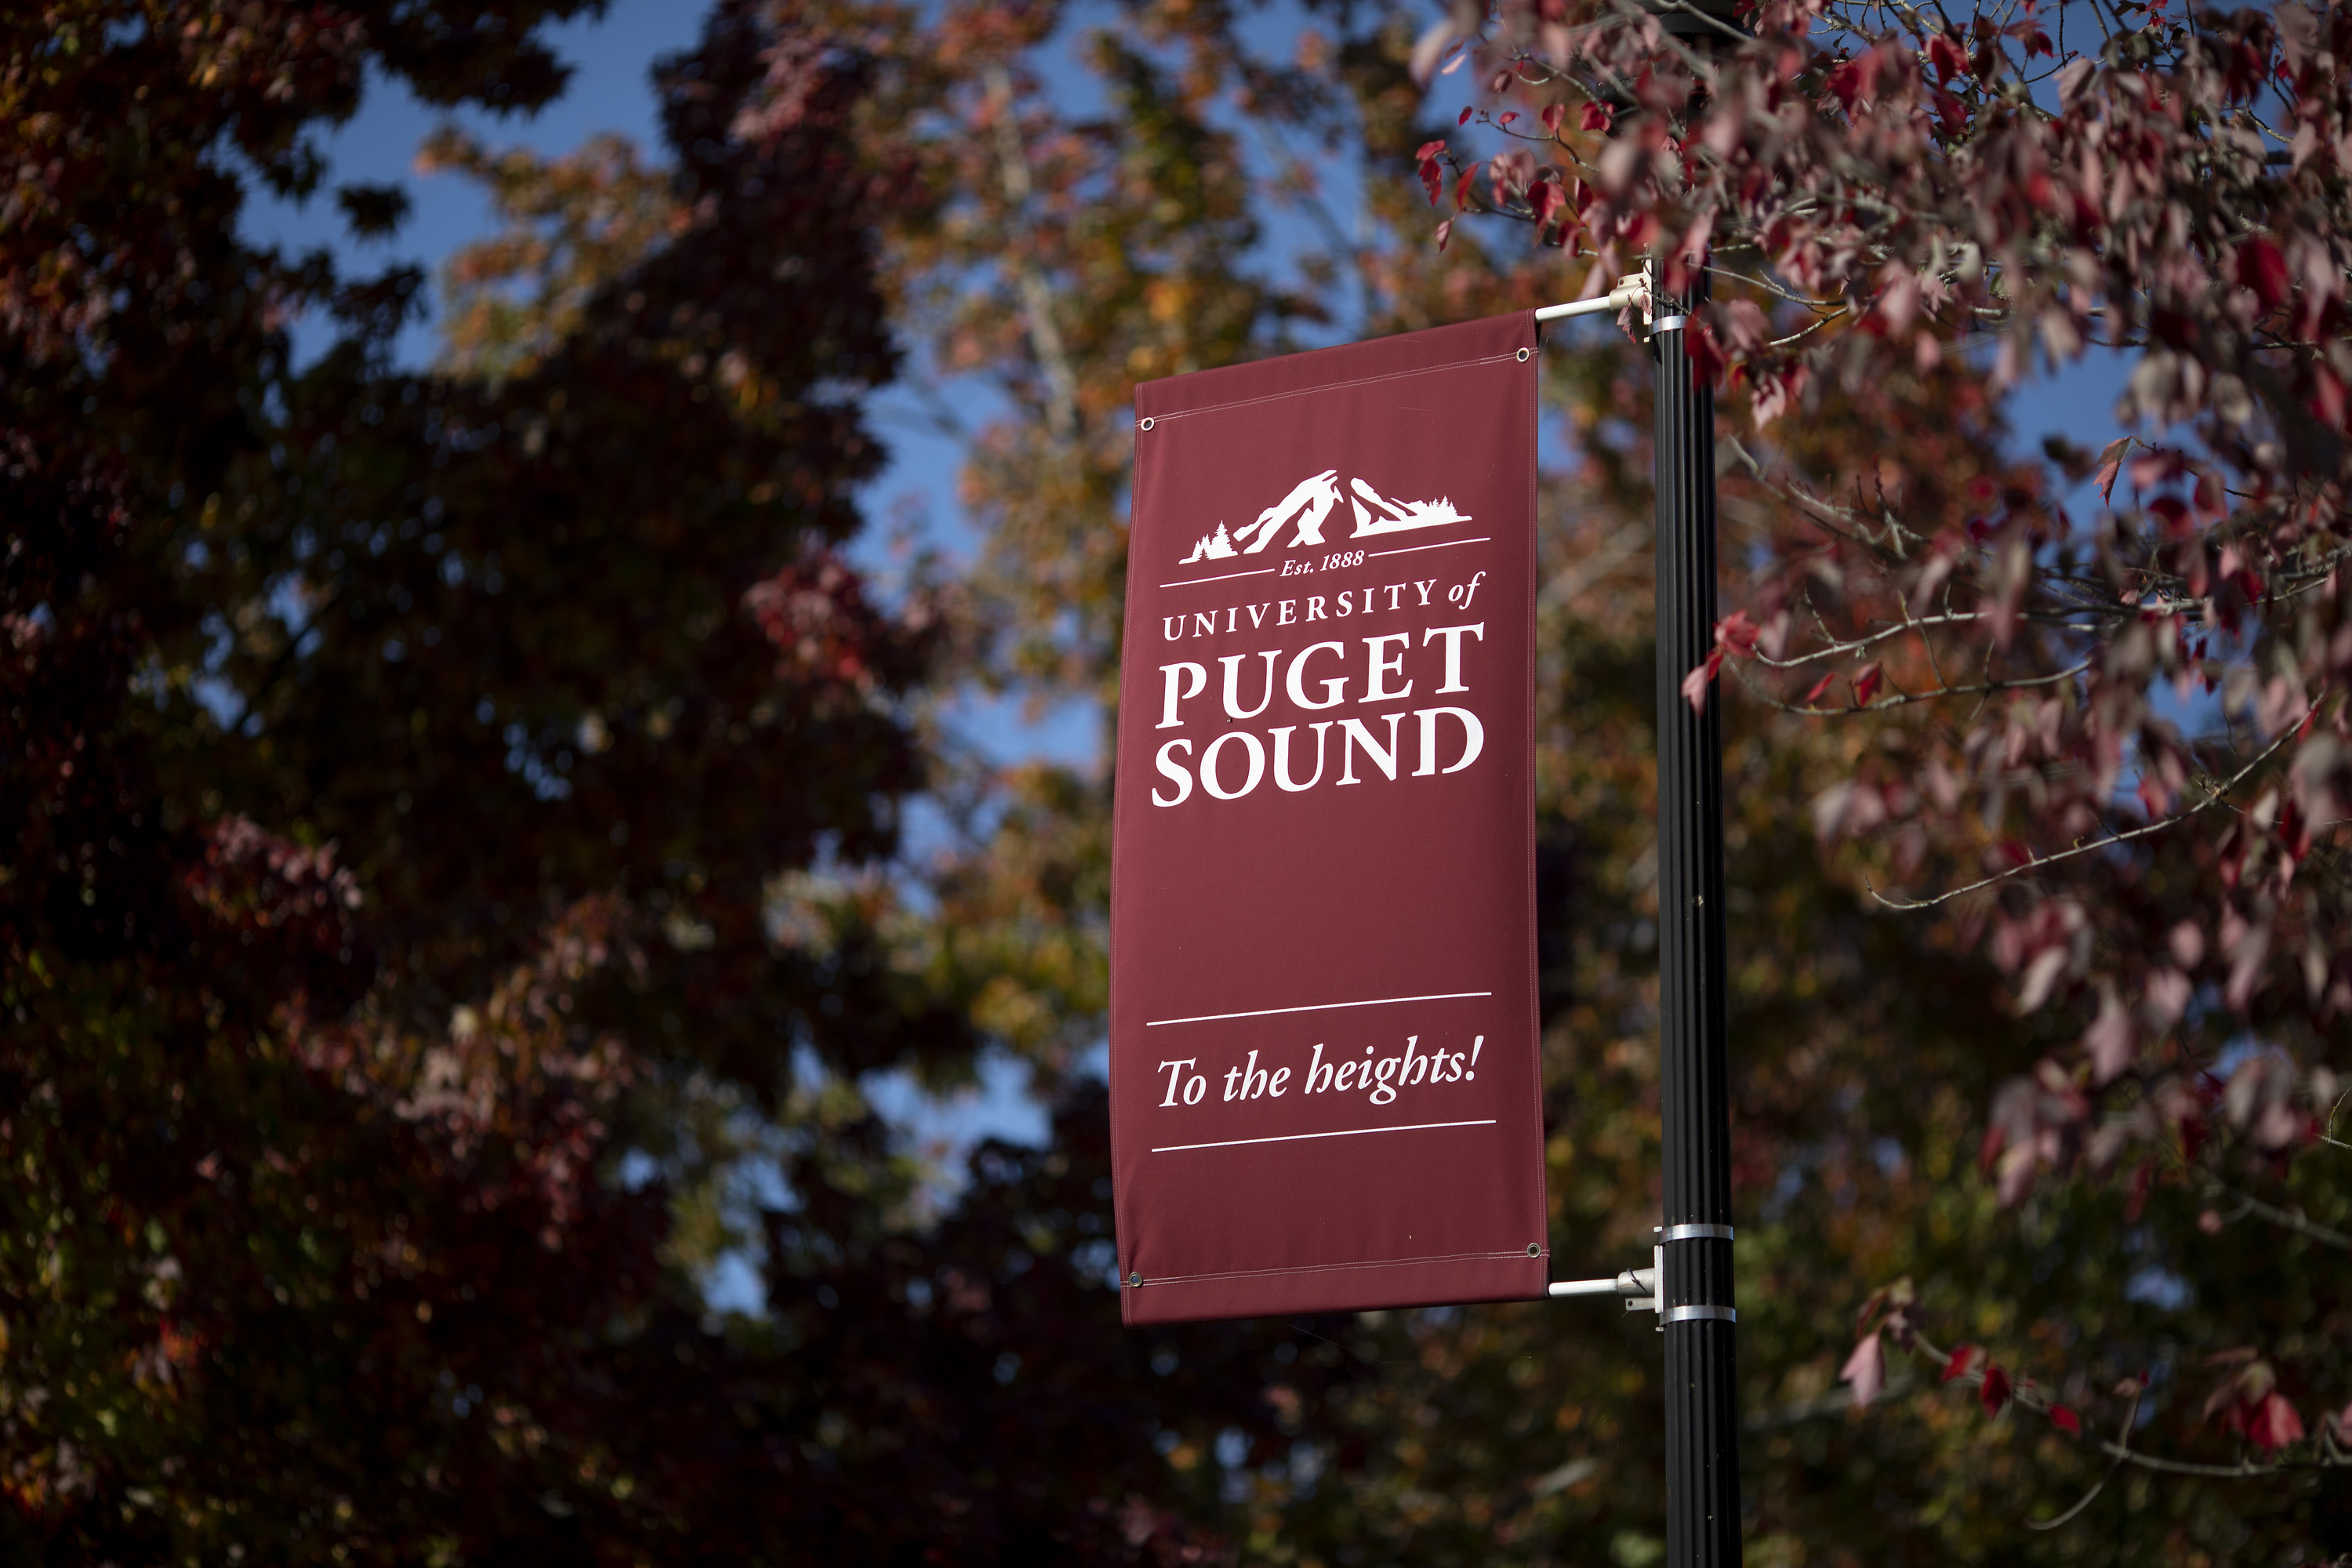 A maroon banner hangs vertically in front of red leaves with the words "University of Puget Sound, To the heights!" displayed. 